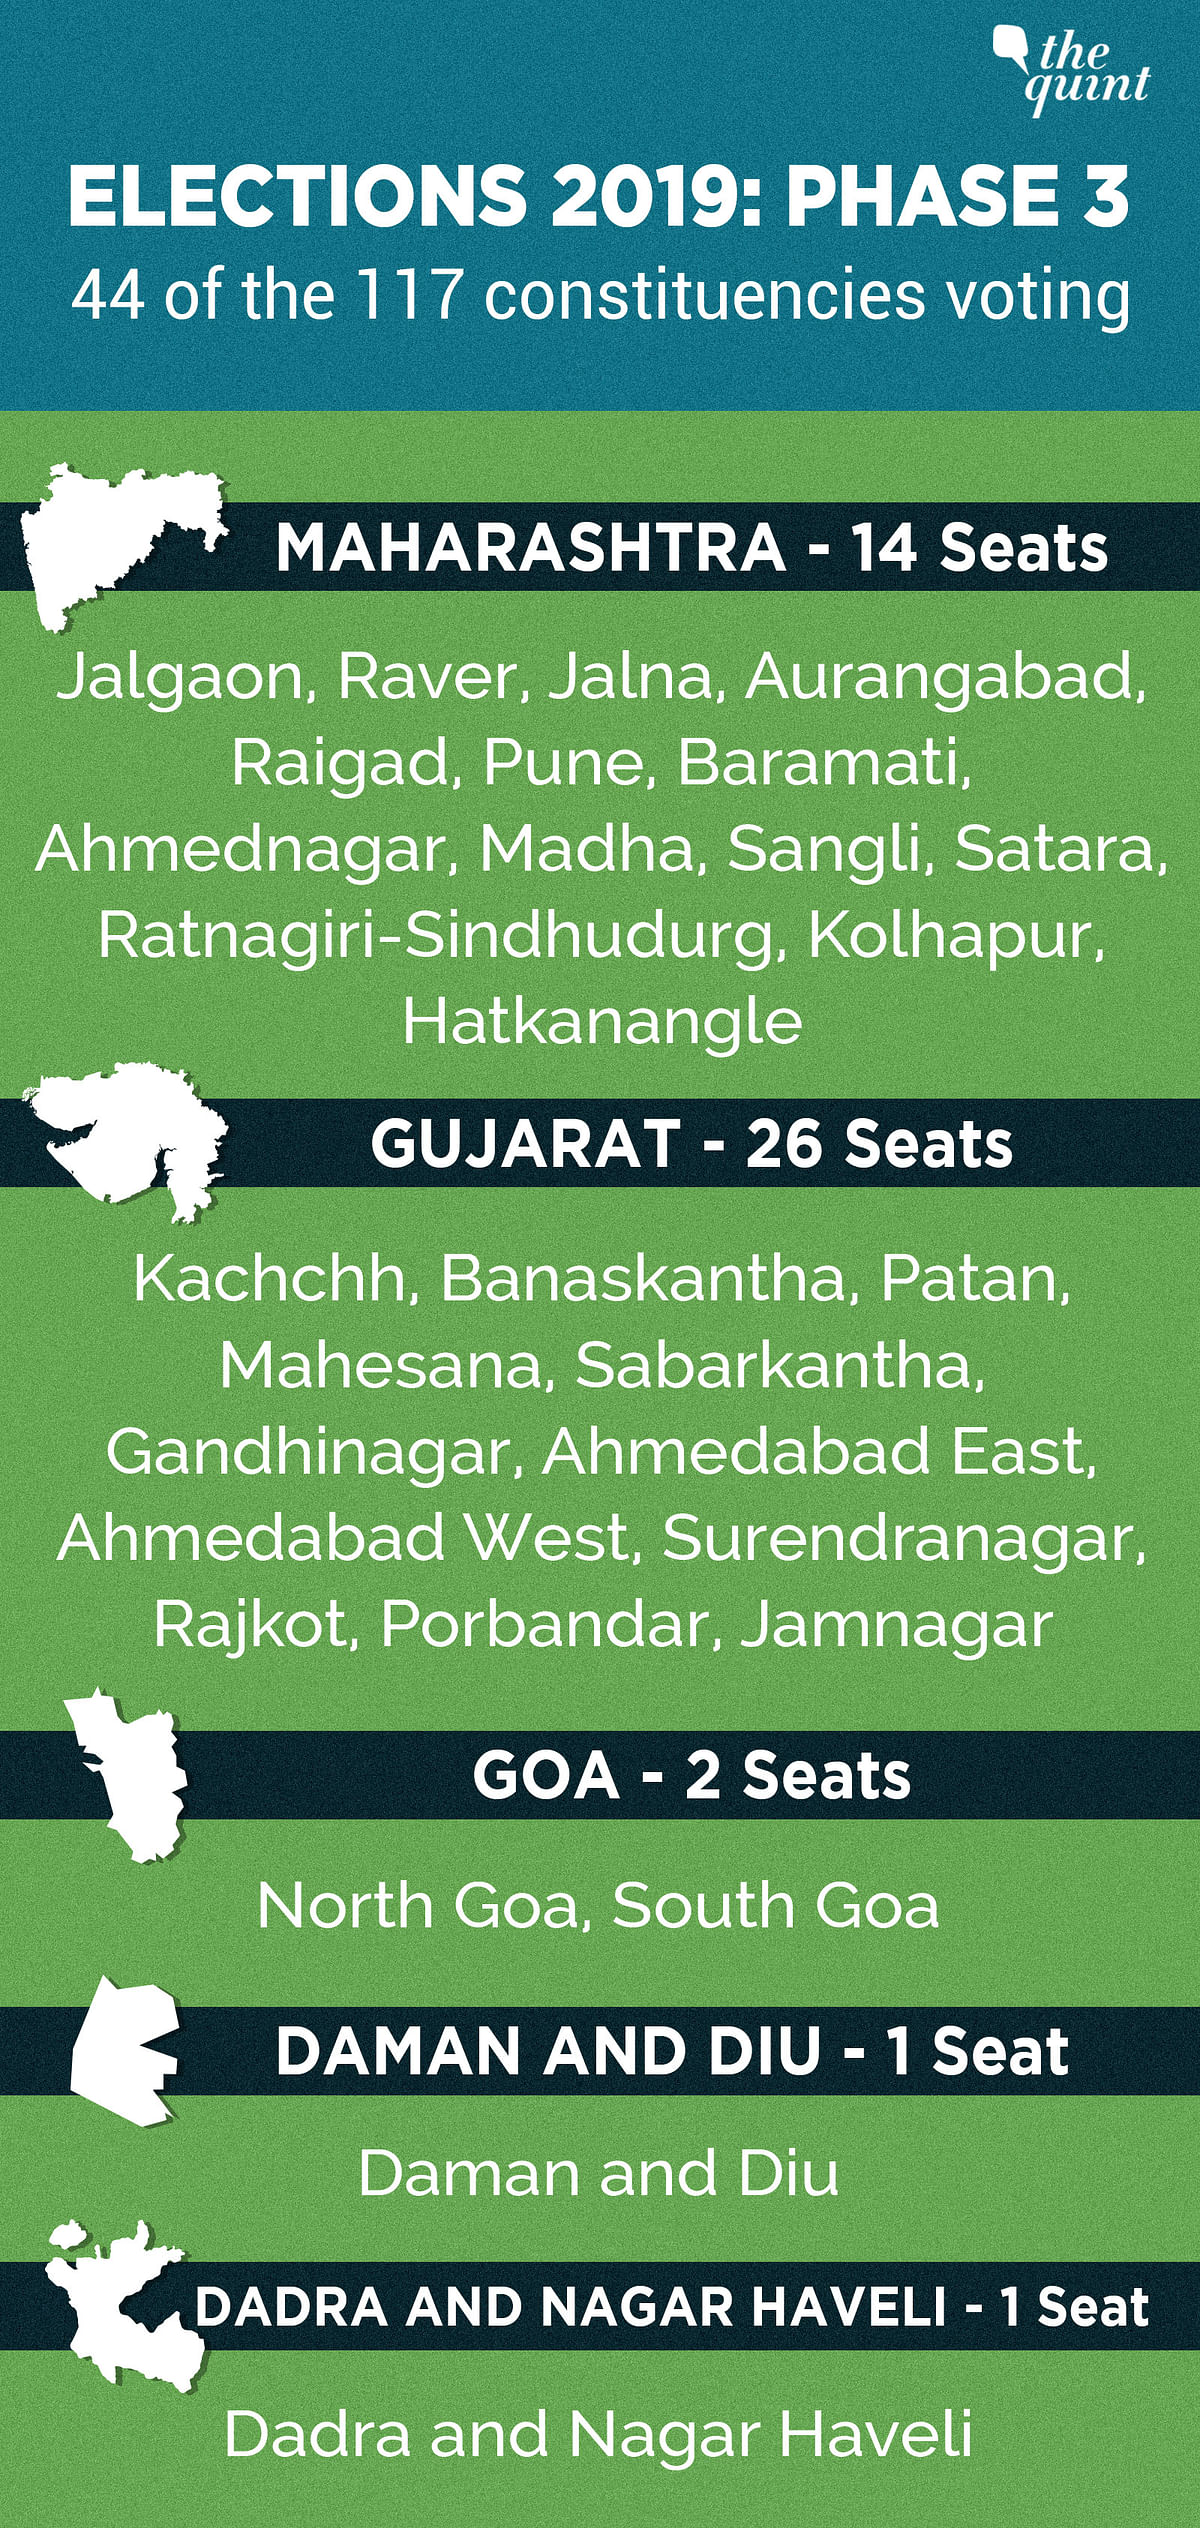 117 constituencies across 13 states & 2 Union Territories will vote on 23 April in the third phase of LS polls.